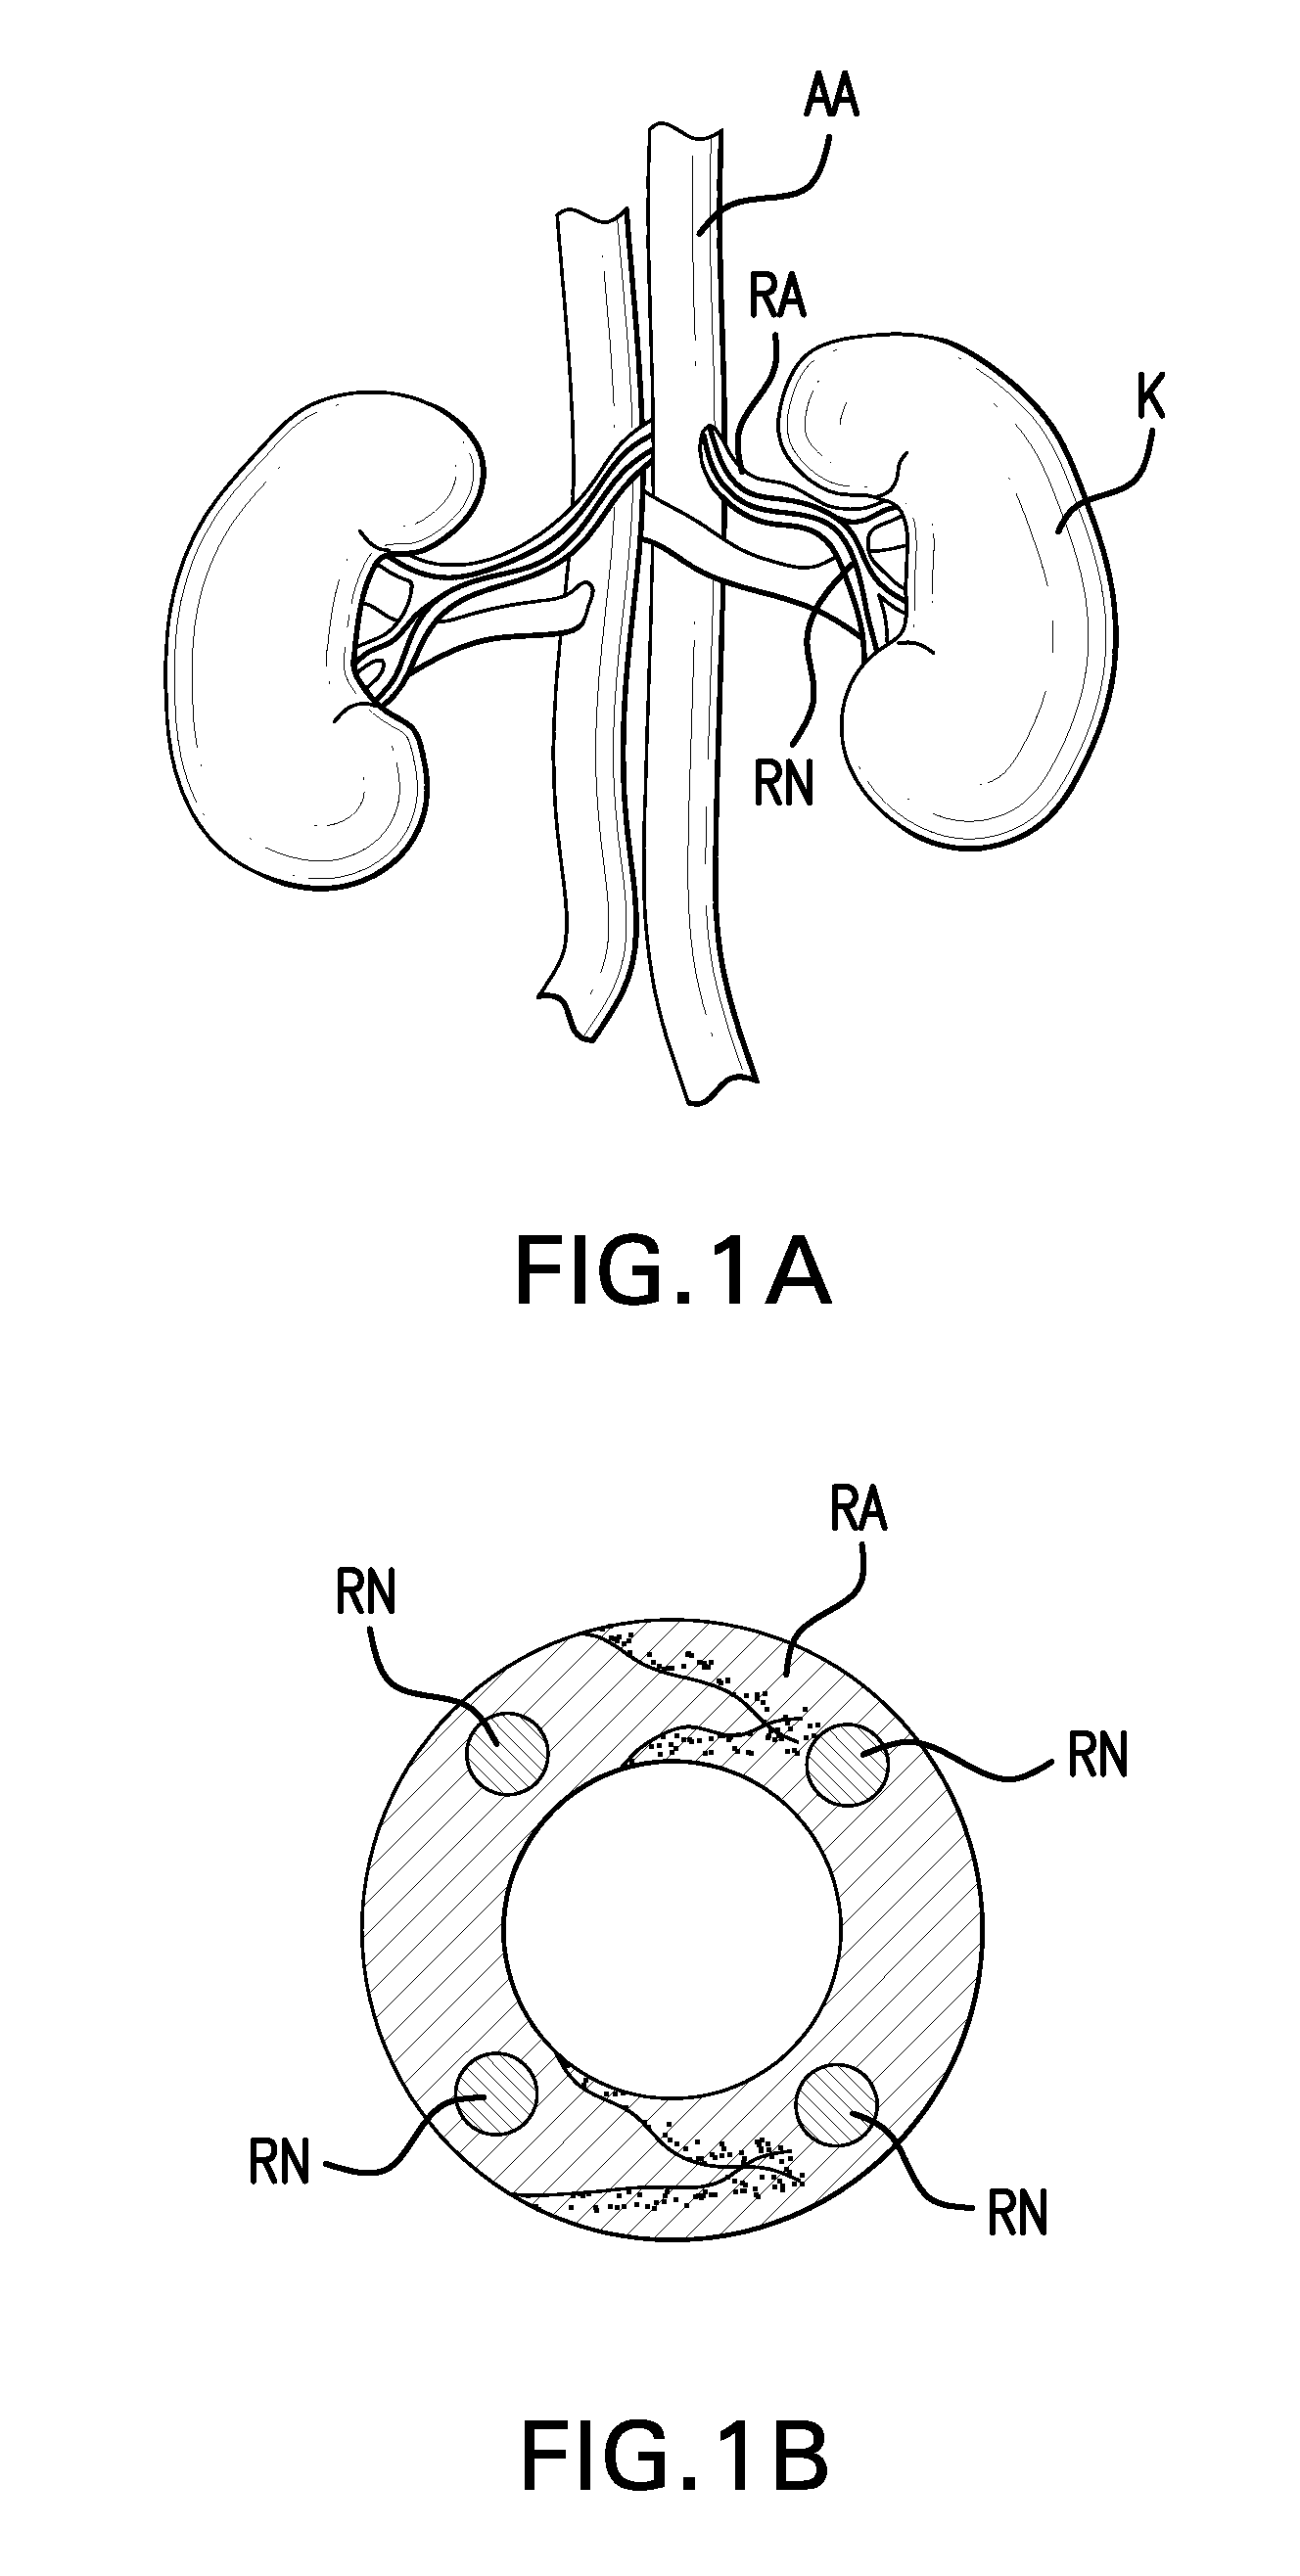 Methods and devices for denervation